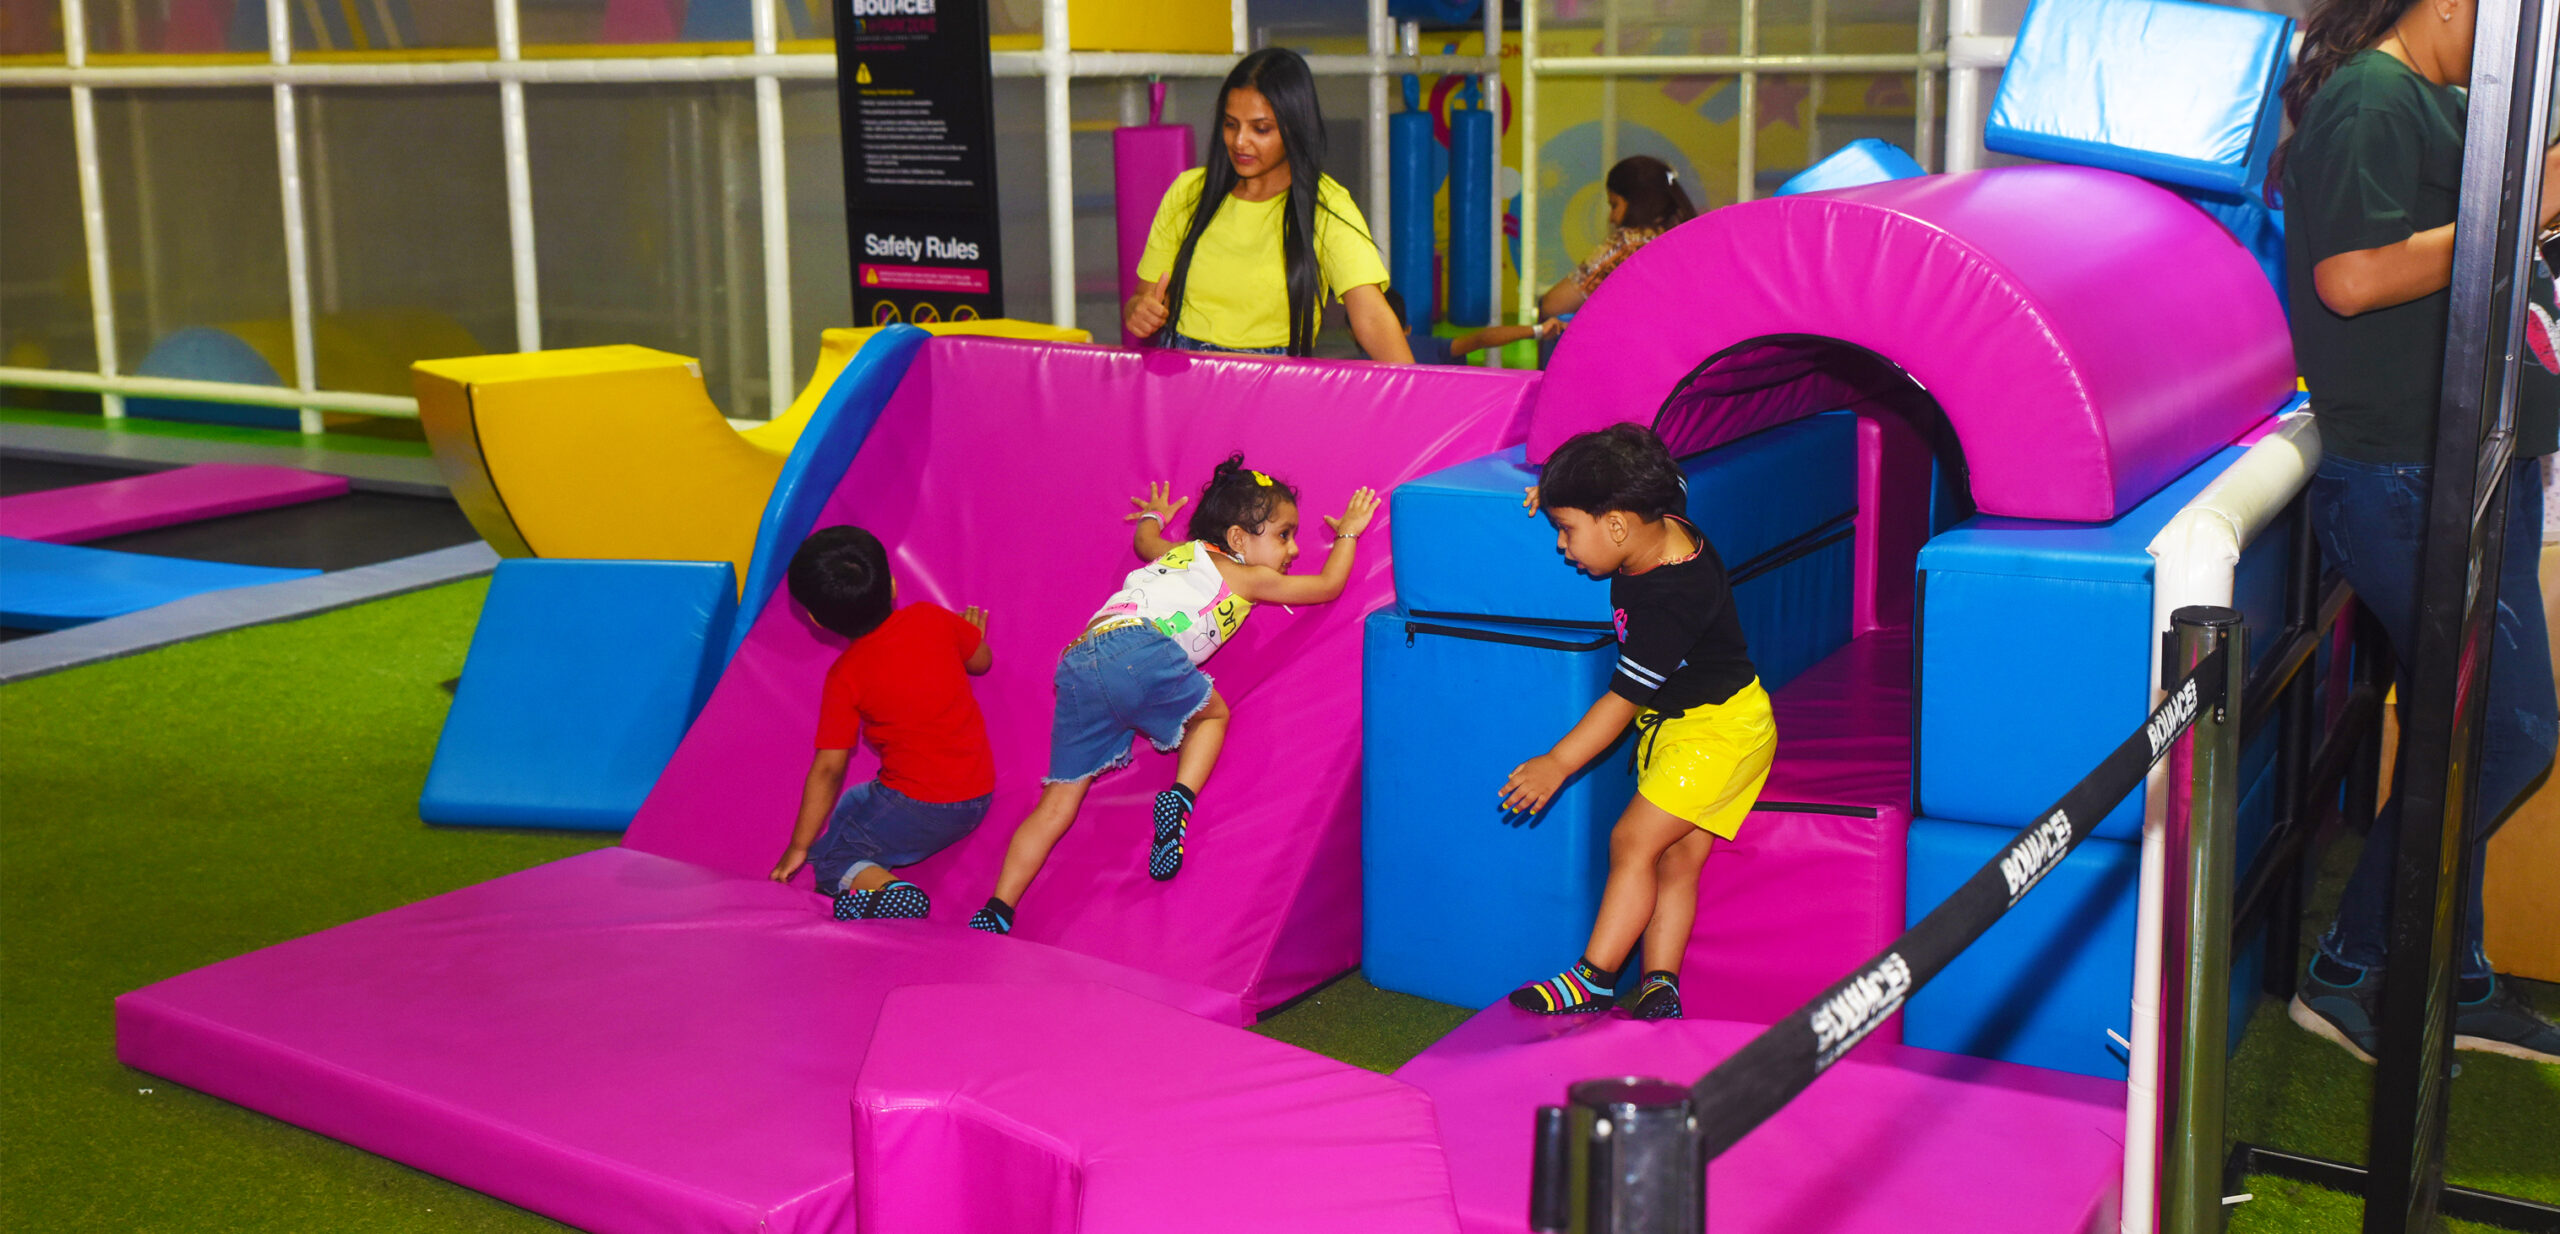 India's Largest Trampoline Park - BOUNCE INC